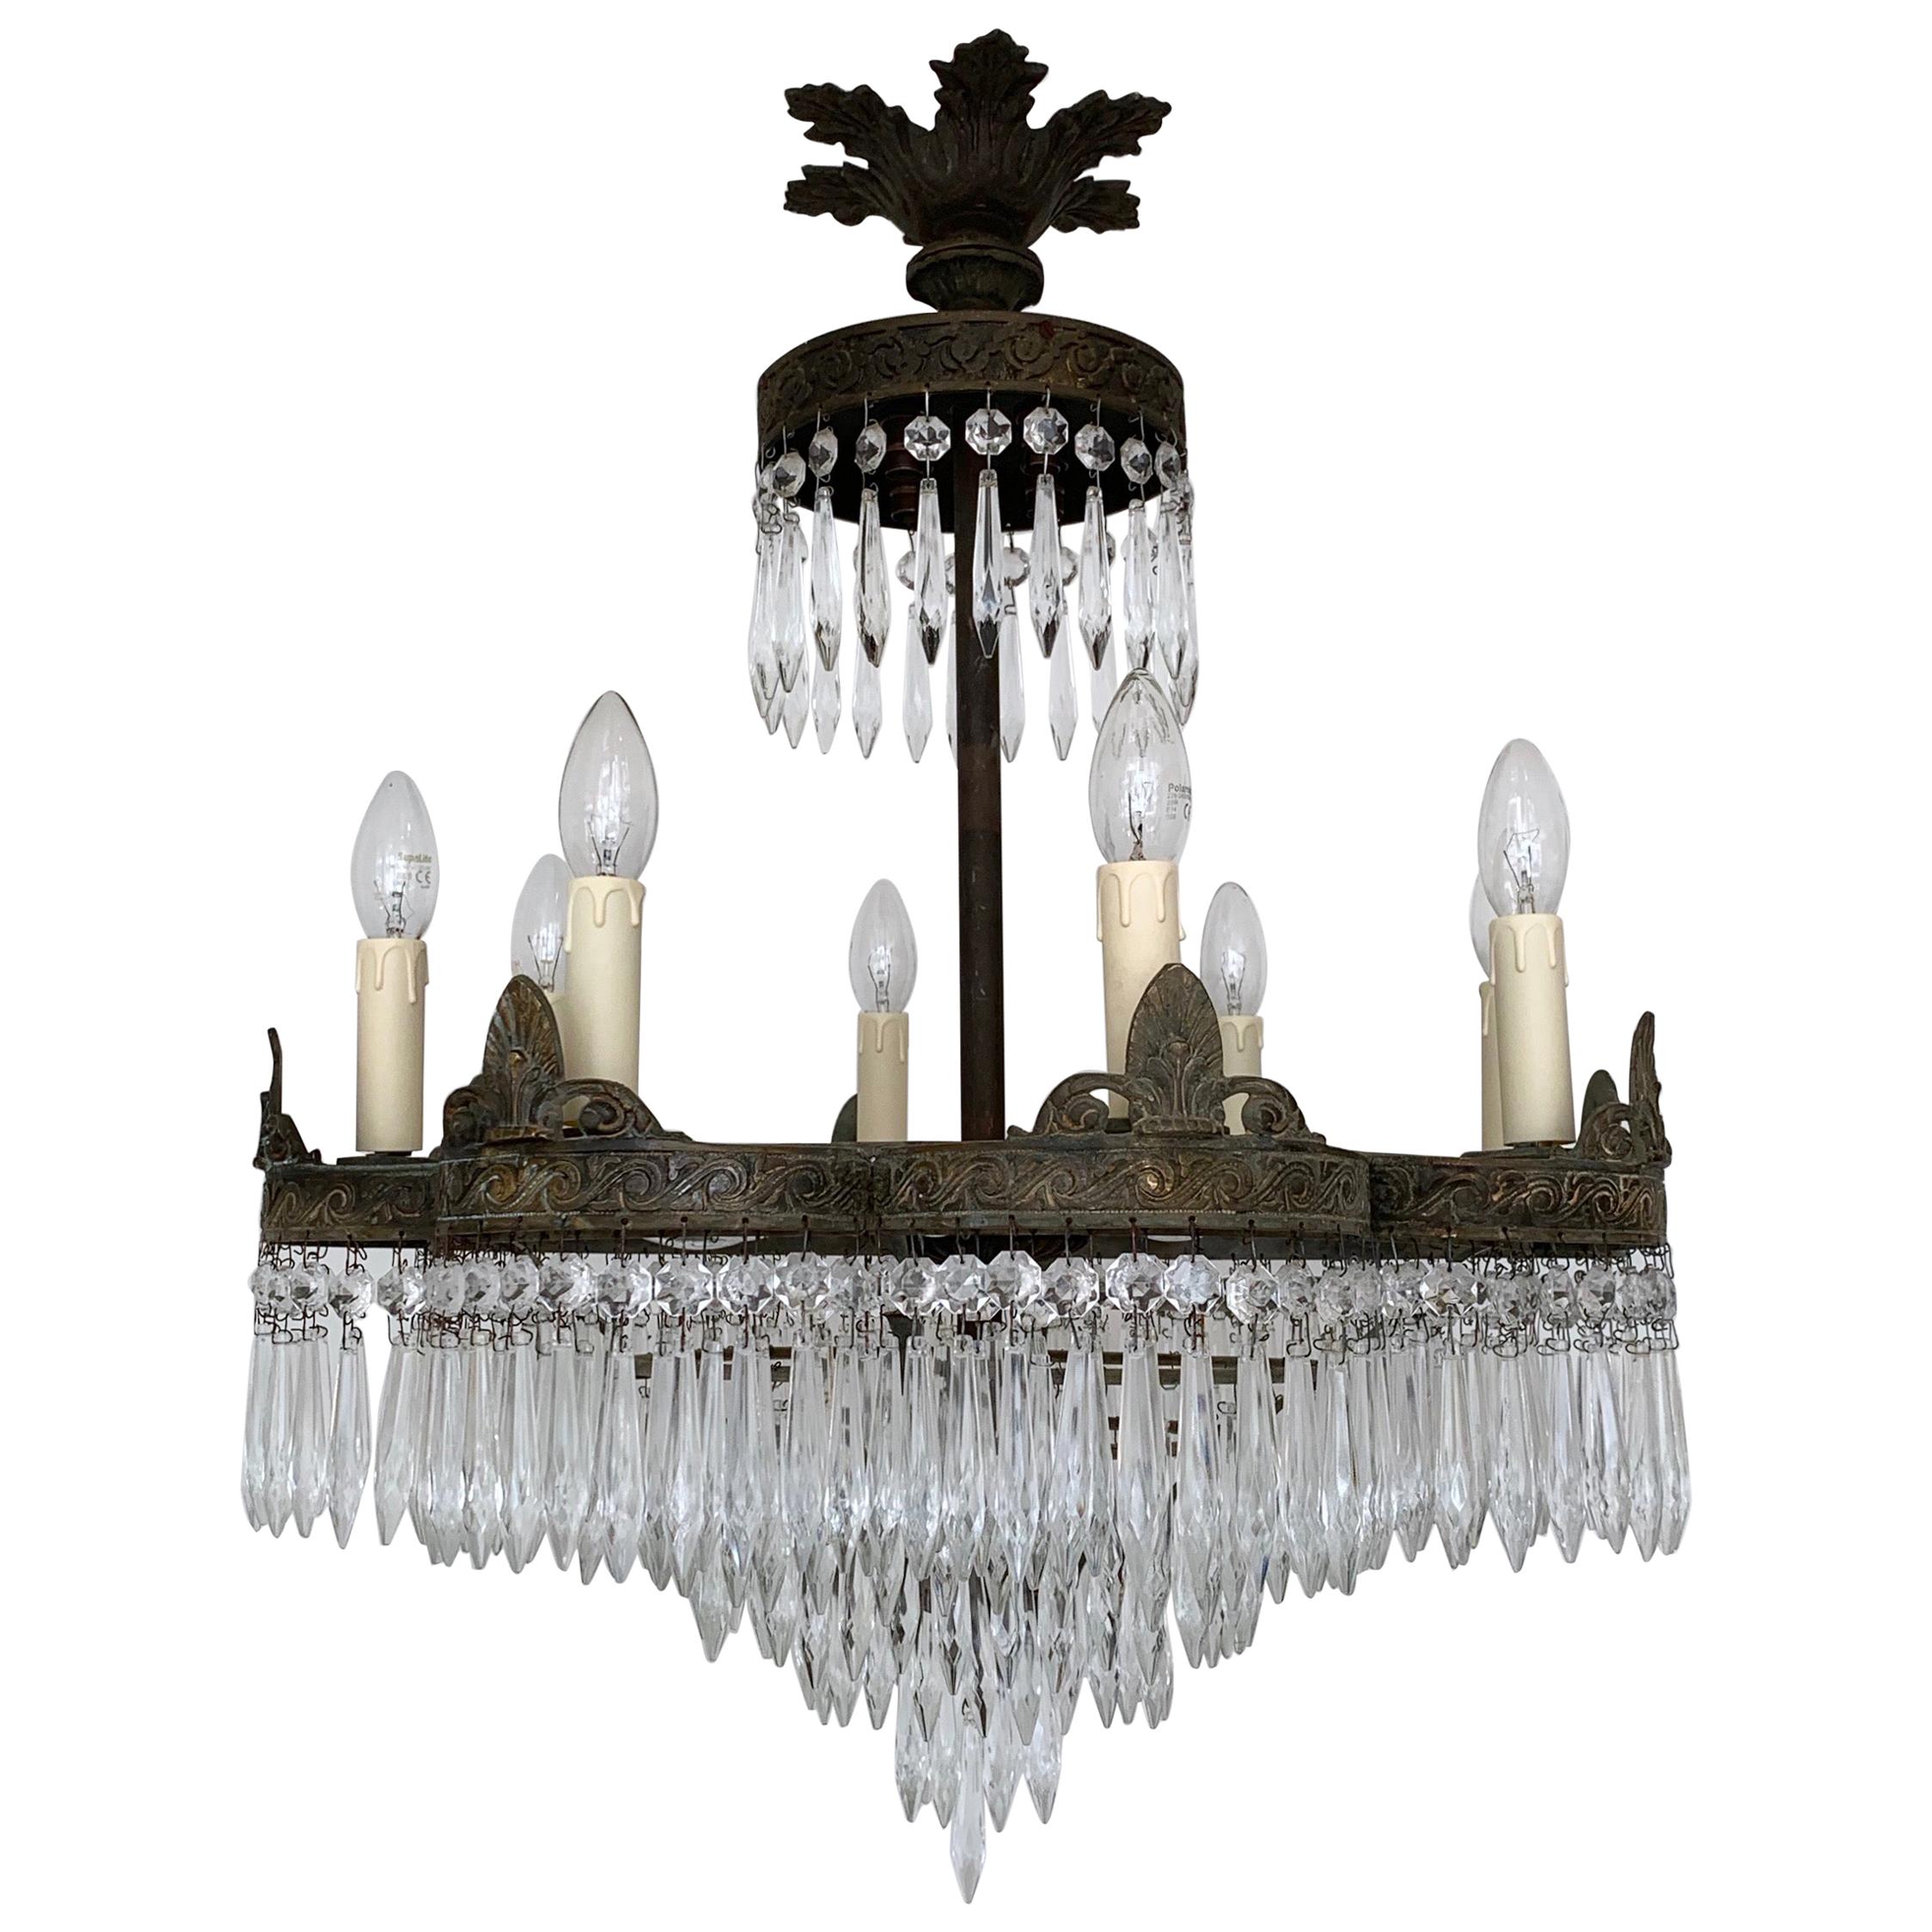 Early 1900s French Waterfall Petal Frame Chandelier with Glass Icicle Drops For Sale